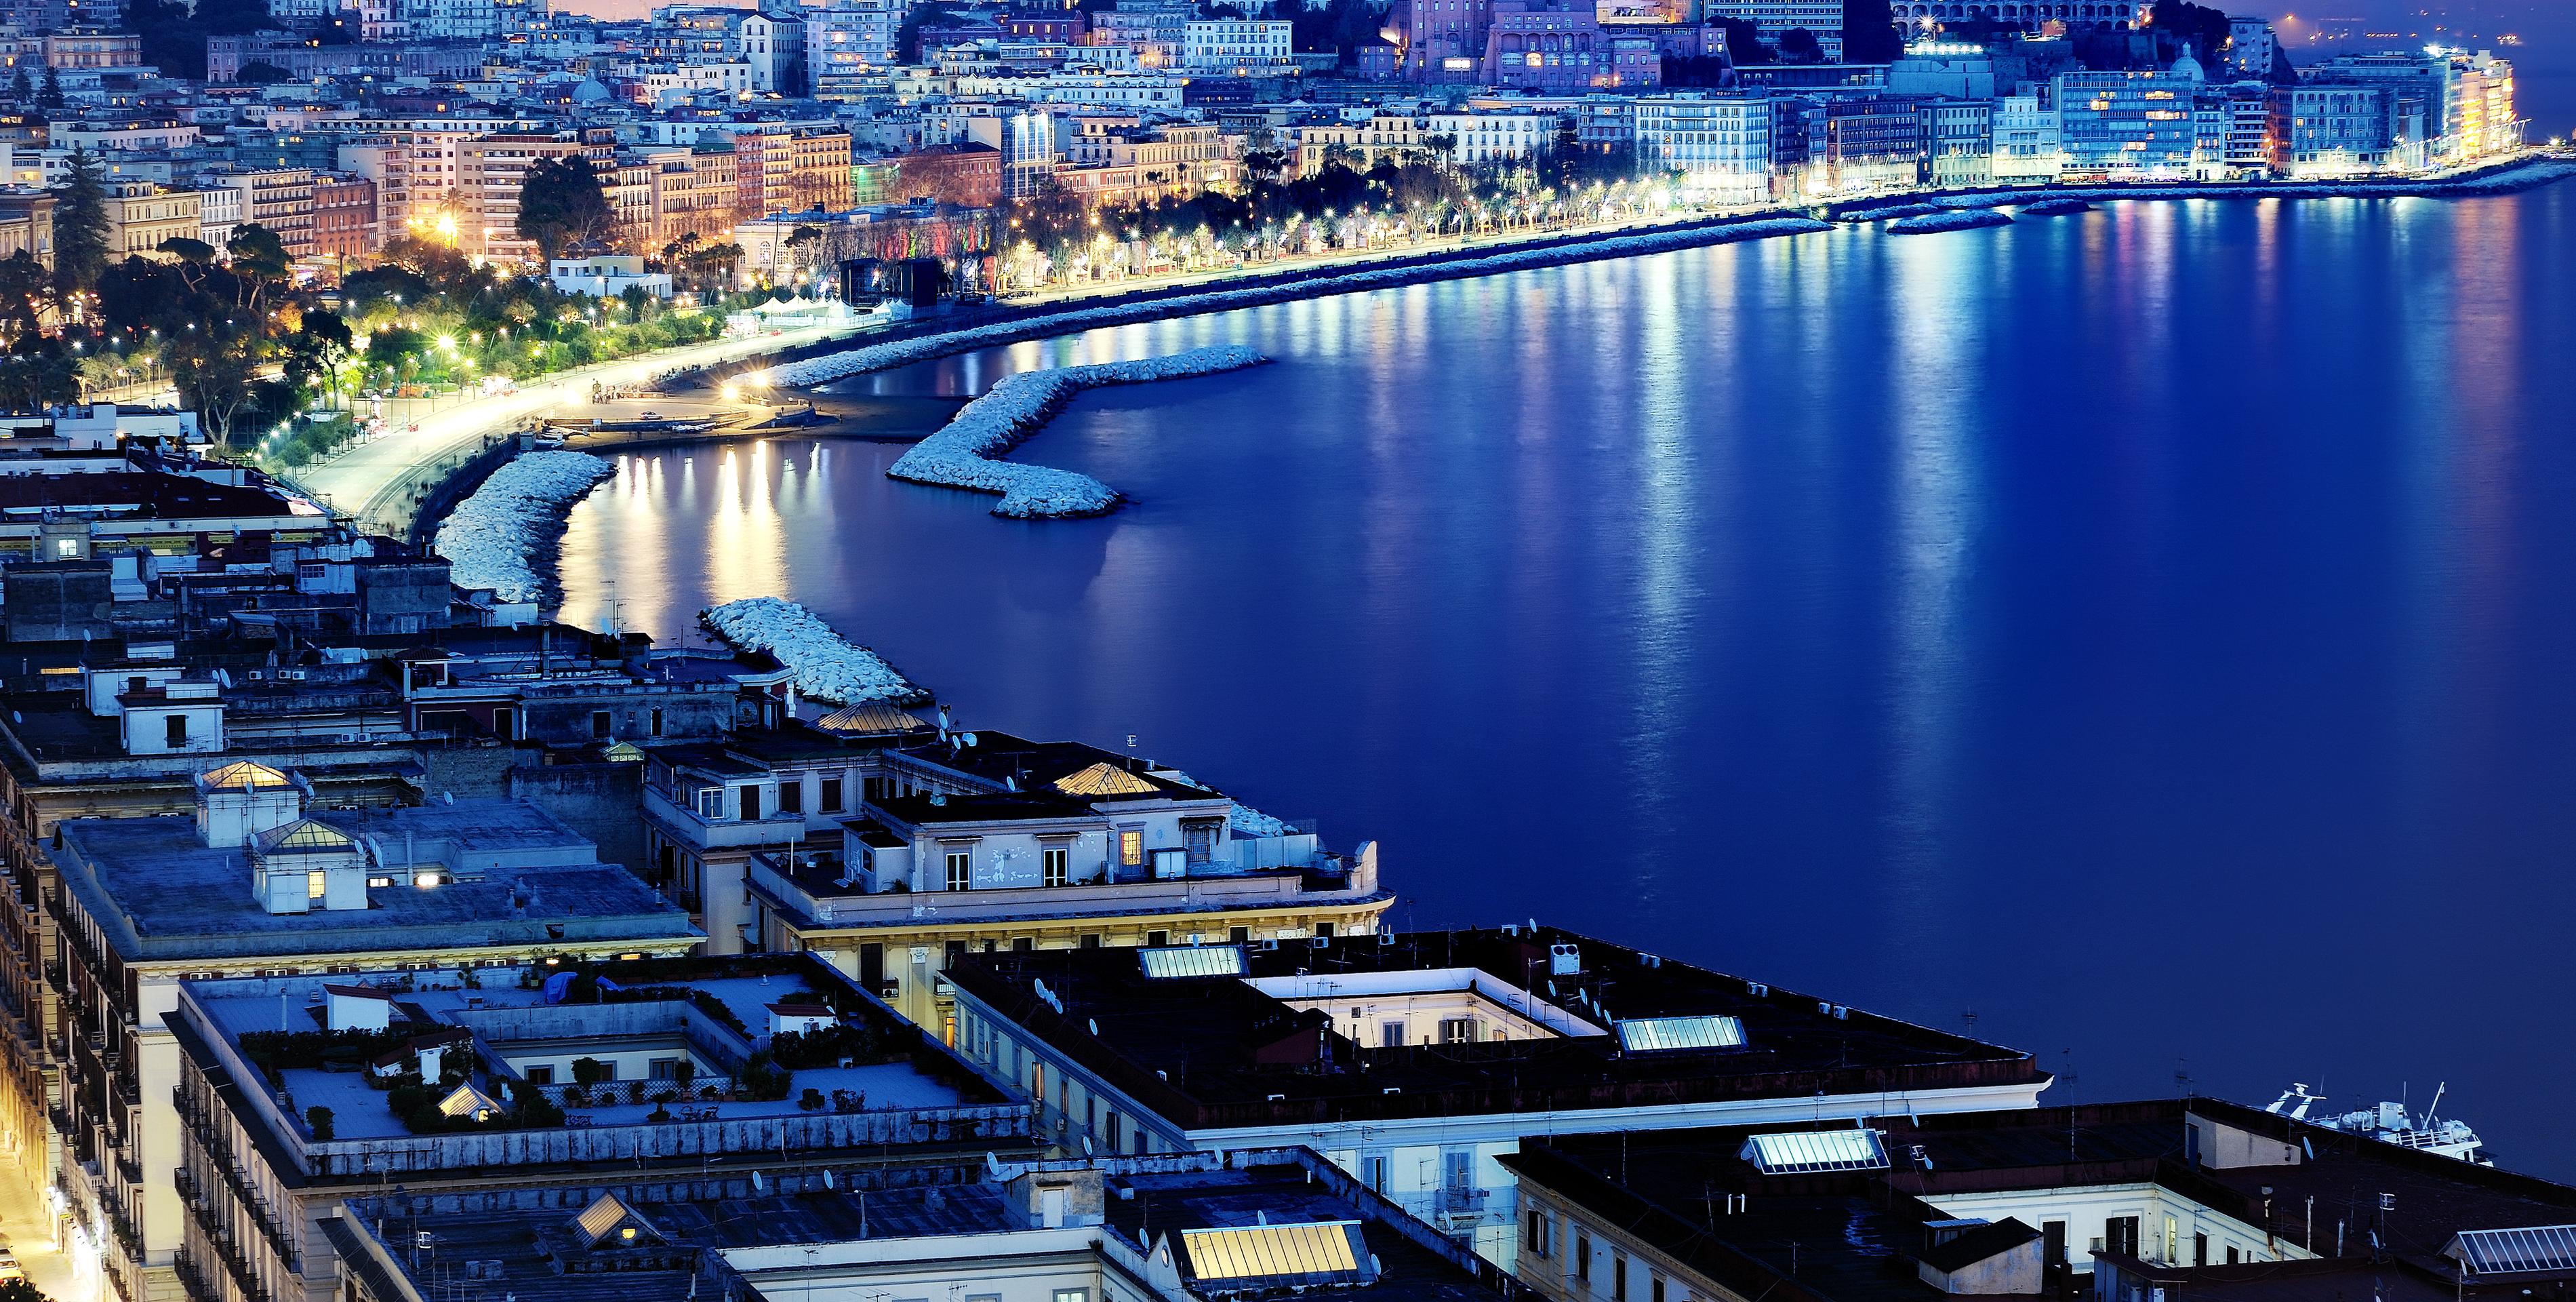 Naples Night Tour by Bus - dinner included